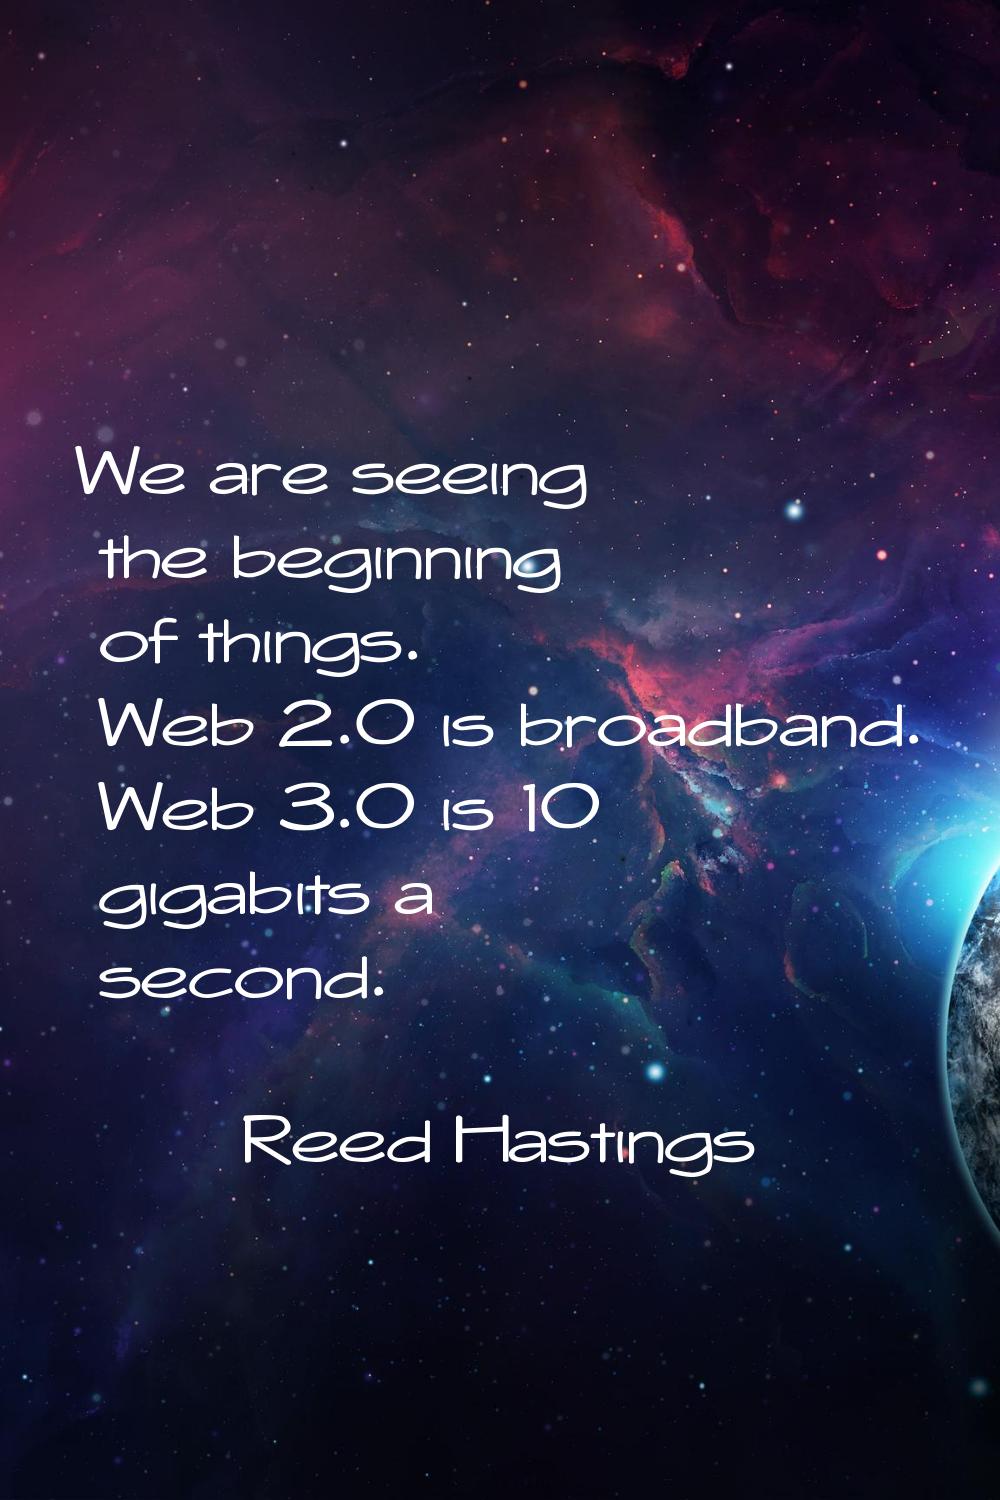 We are seeing the beginning of things. Web 2.0 is broadband. Web 3.0 is 10 gigabits a second.